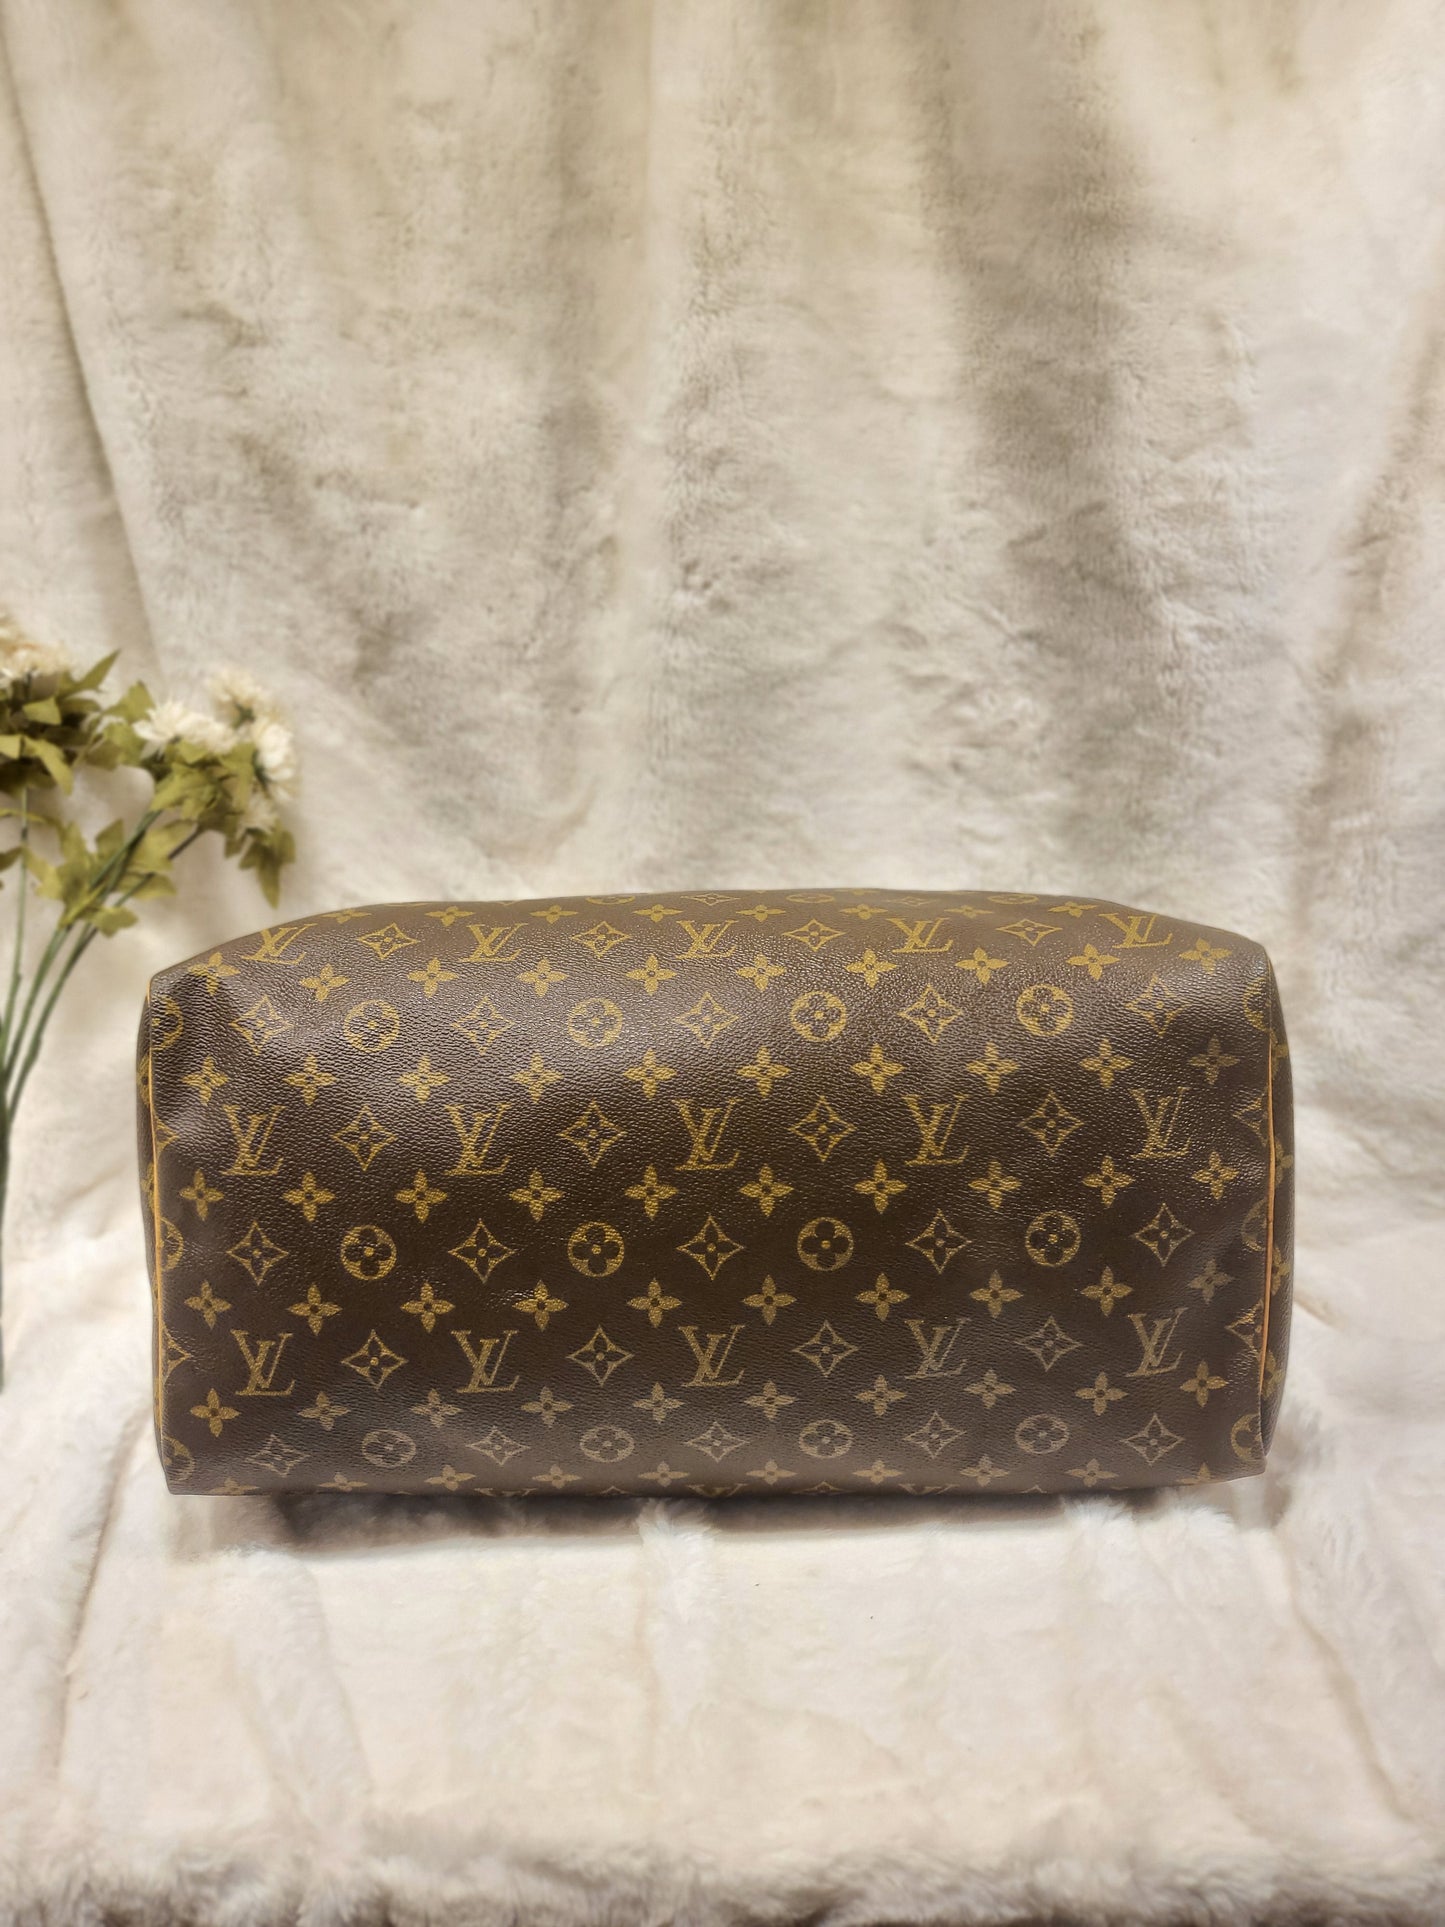 Authentic pre-owned Louis Vuitton speedy 40